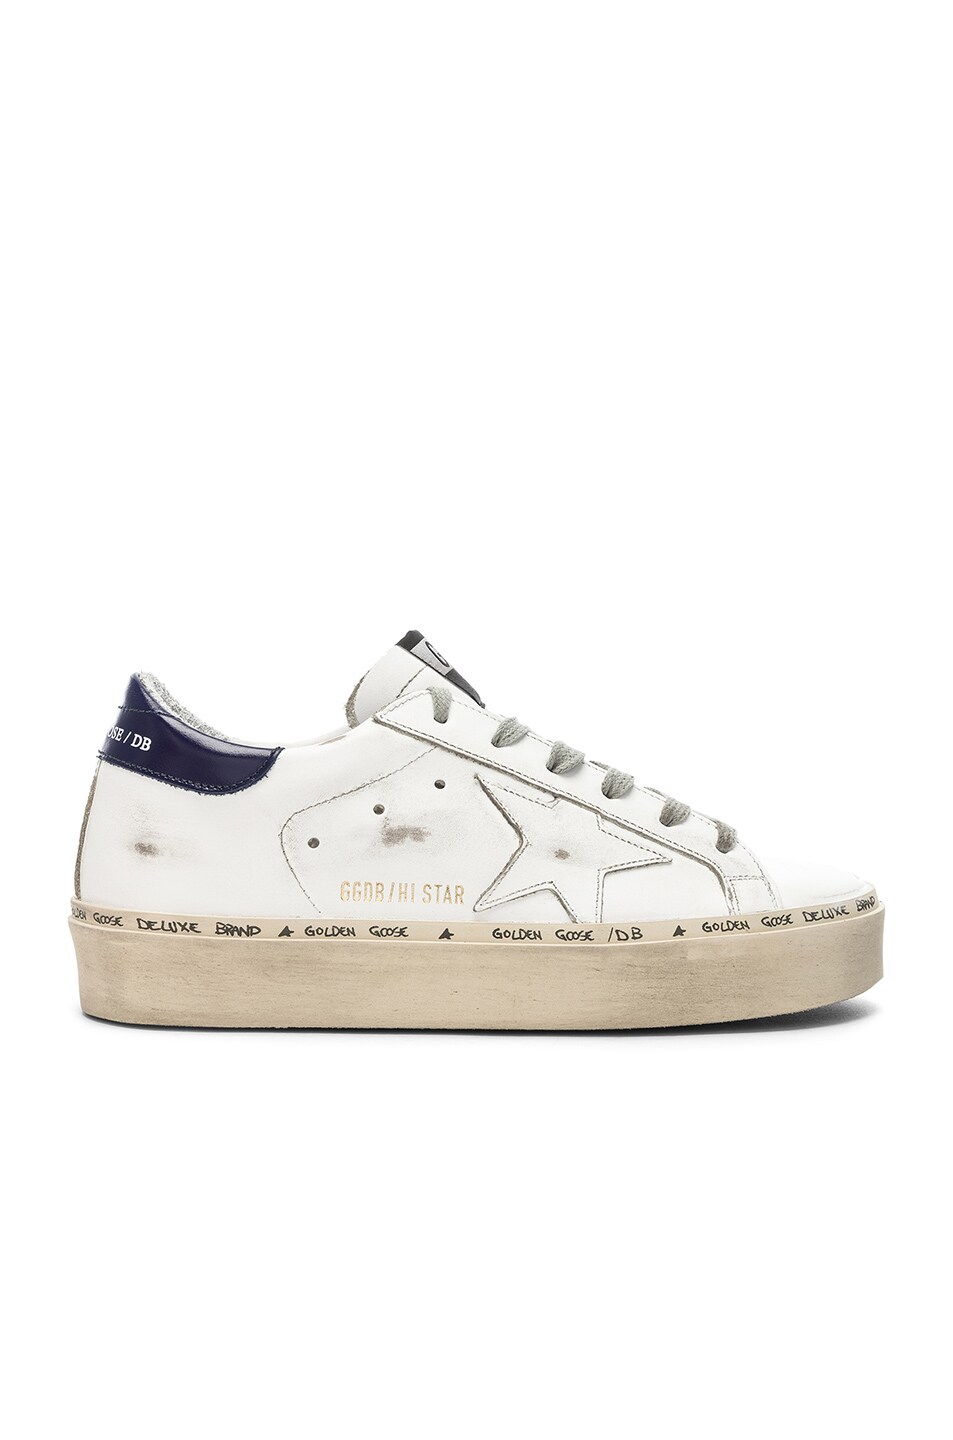 Image 1 of Golden Goose Hi Star Sneakers in White & Blue